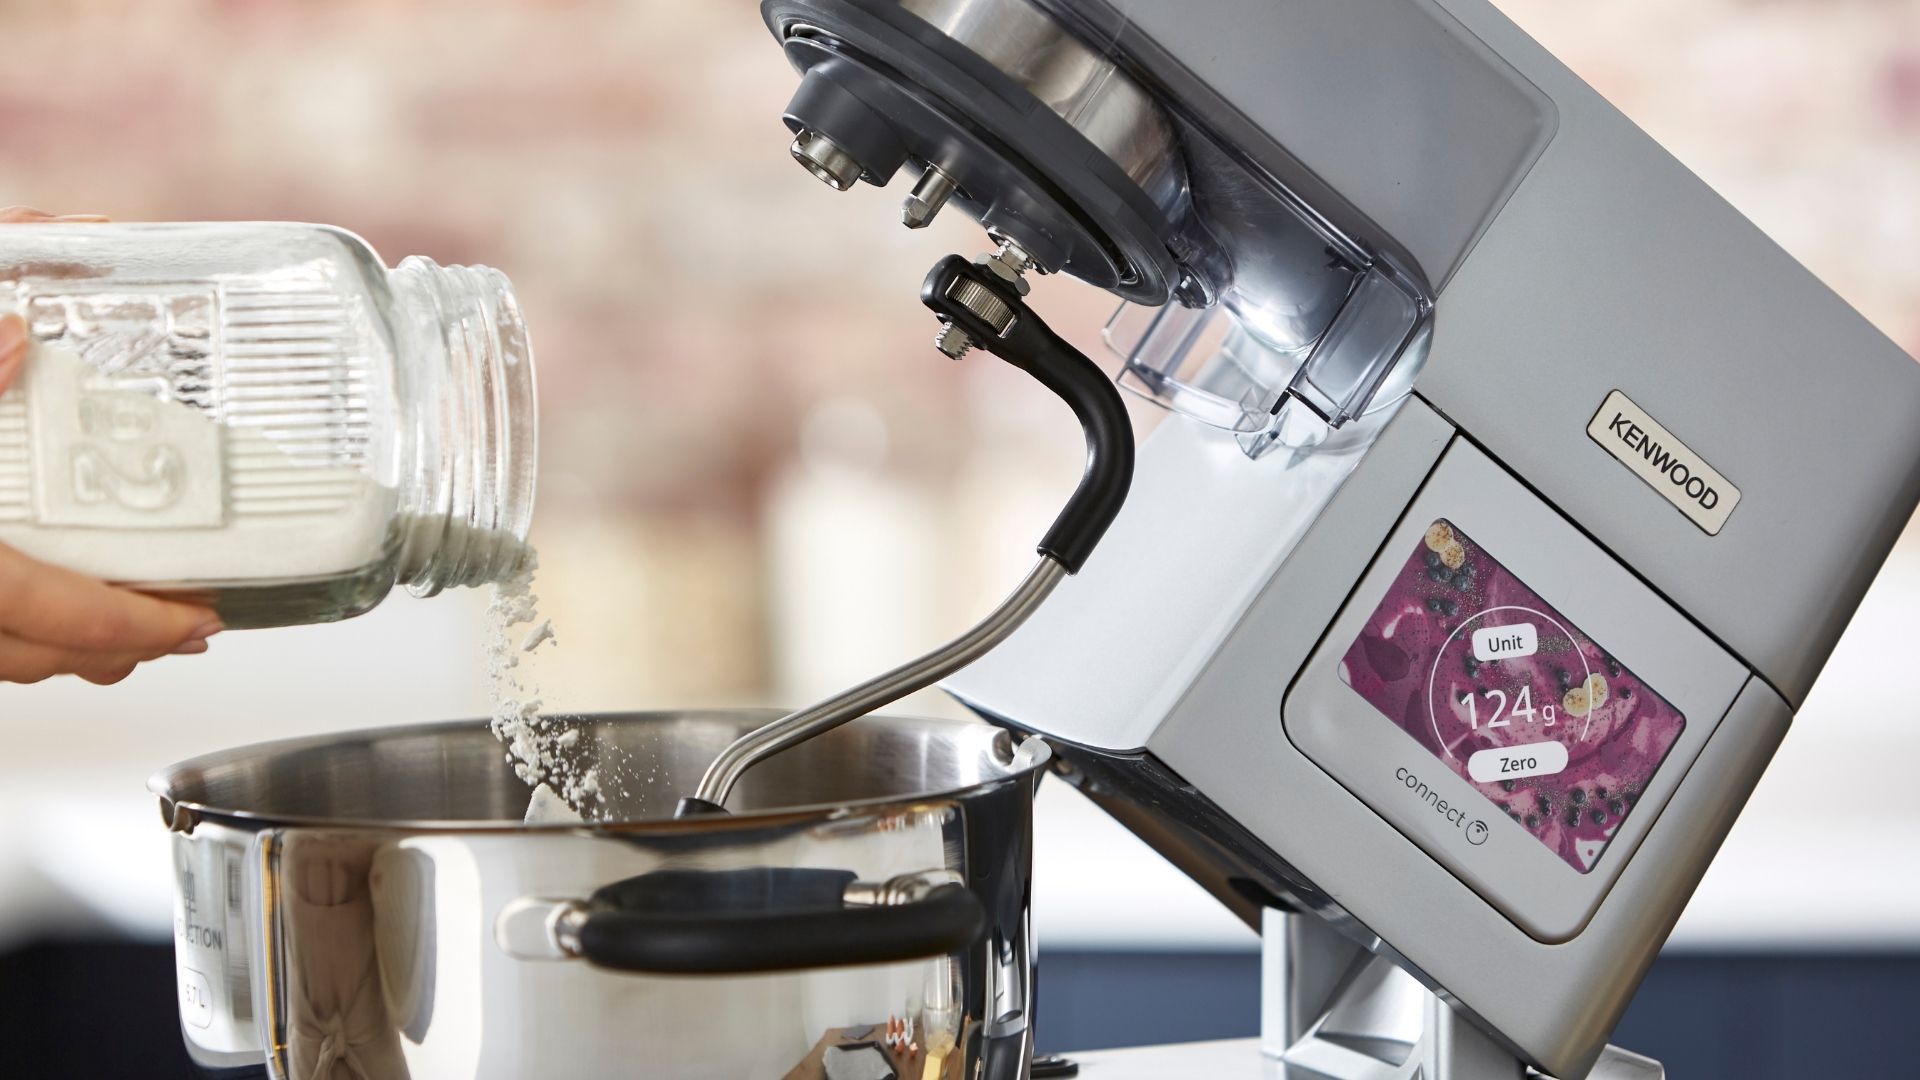 Kenwood Cooking Chef XL Stand Mixer Review: A kitchen unto itself